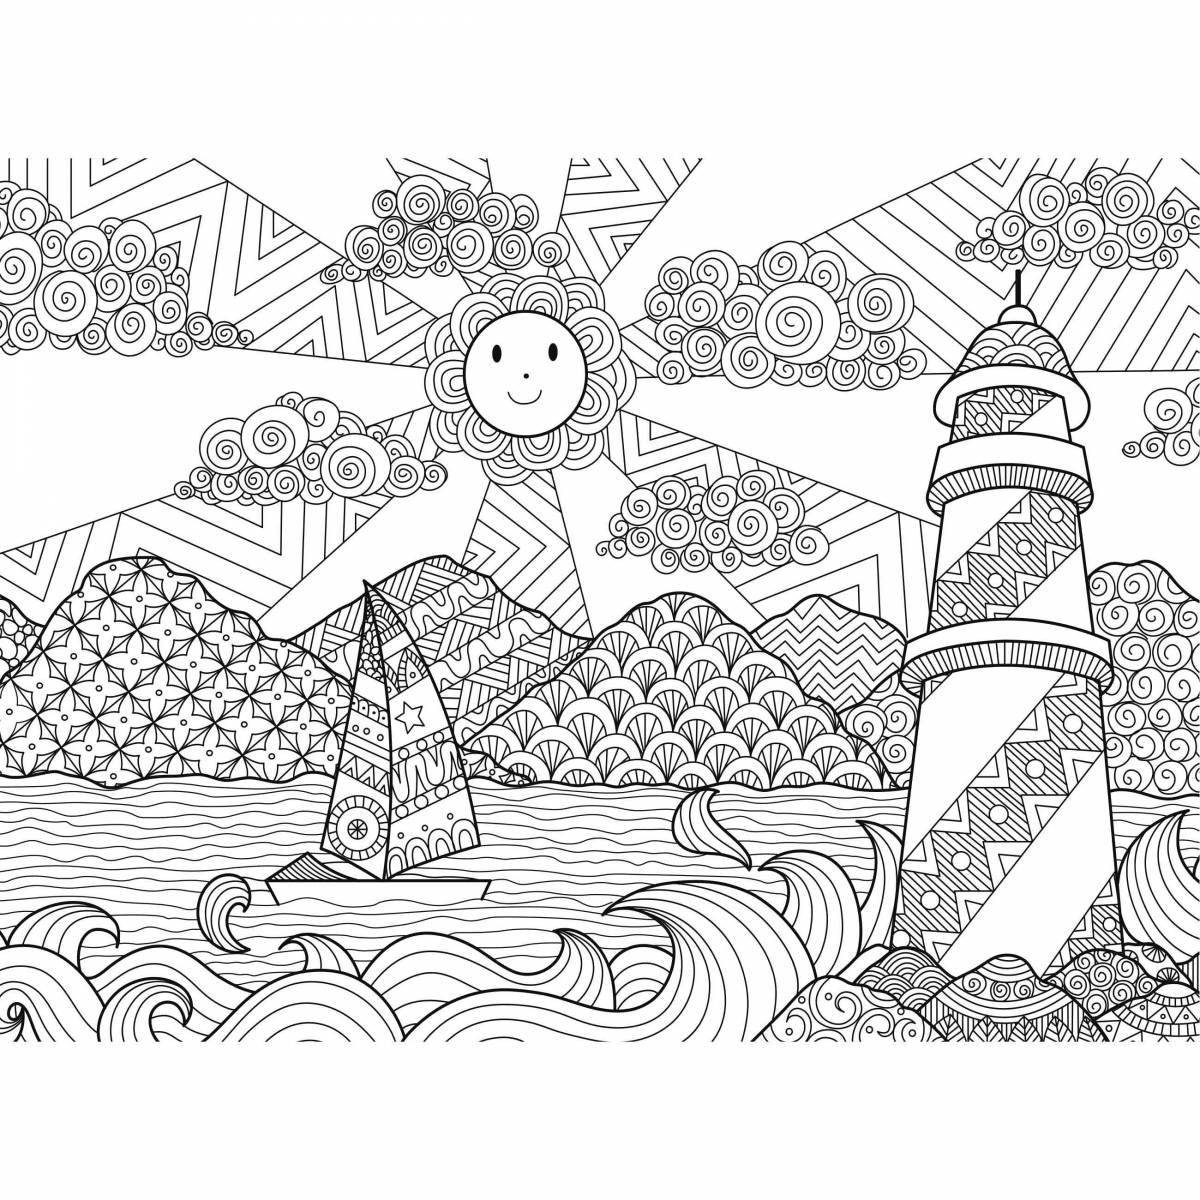 Cute wall mural coloring pages